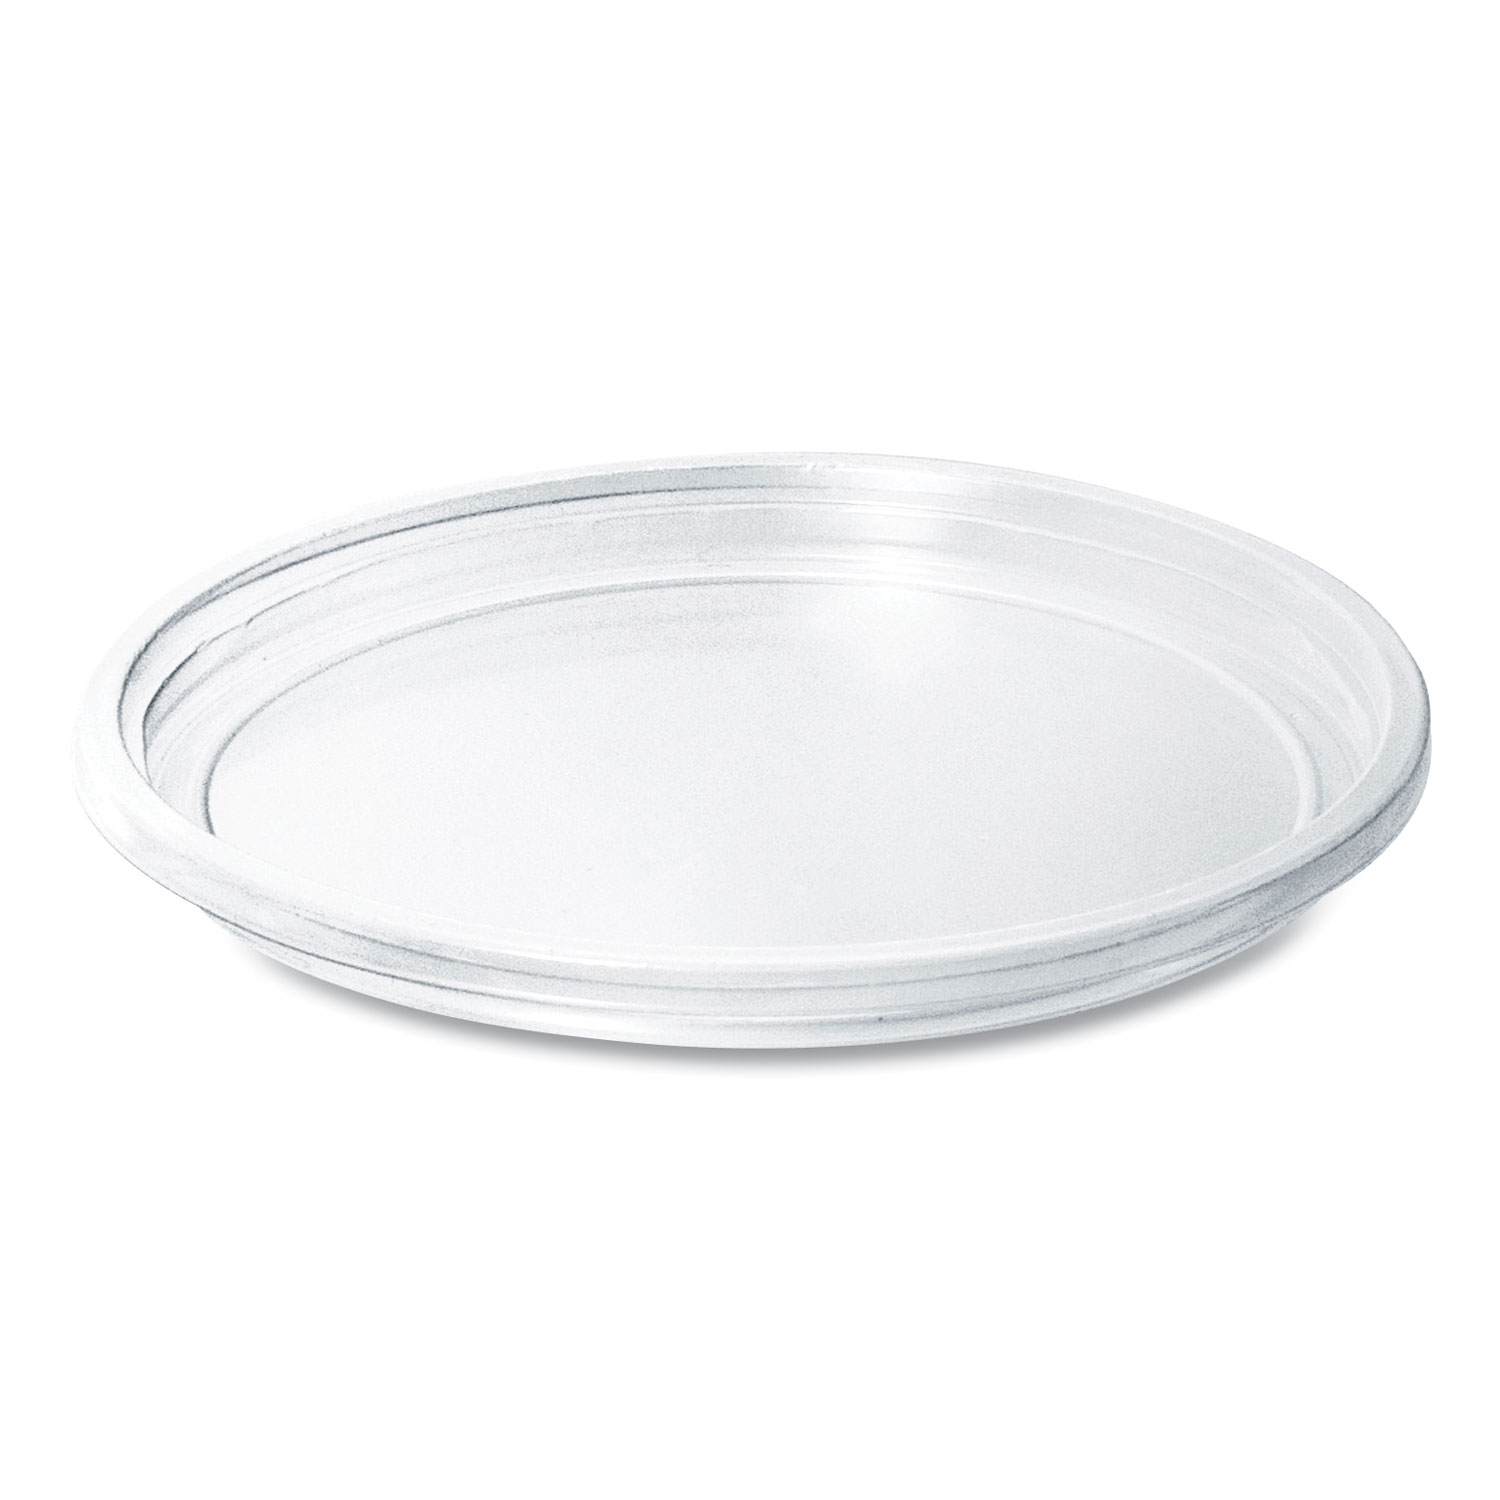  Dart LG8RB-0090 Bare Eco-Forward RPET Deli Container Lids, For 8-32 oz Containers, Clear, 50 Lids/Sleeve, 10 Sleeves/Carton (SCCLG8RB) 